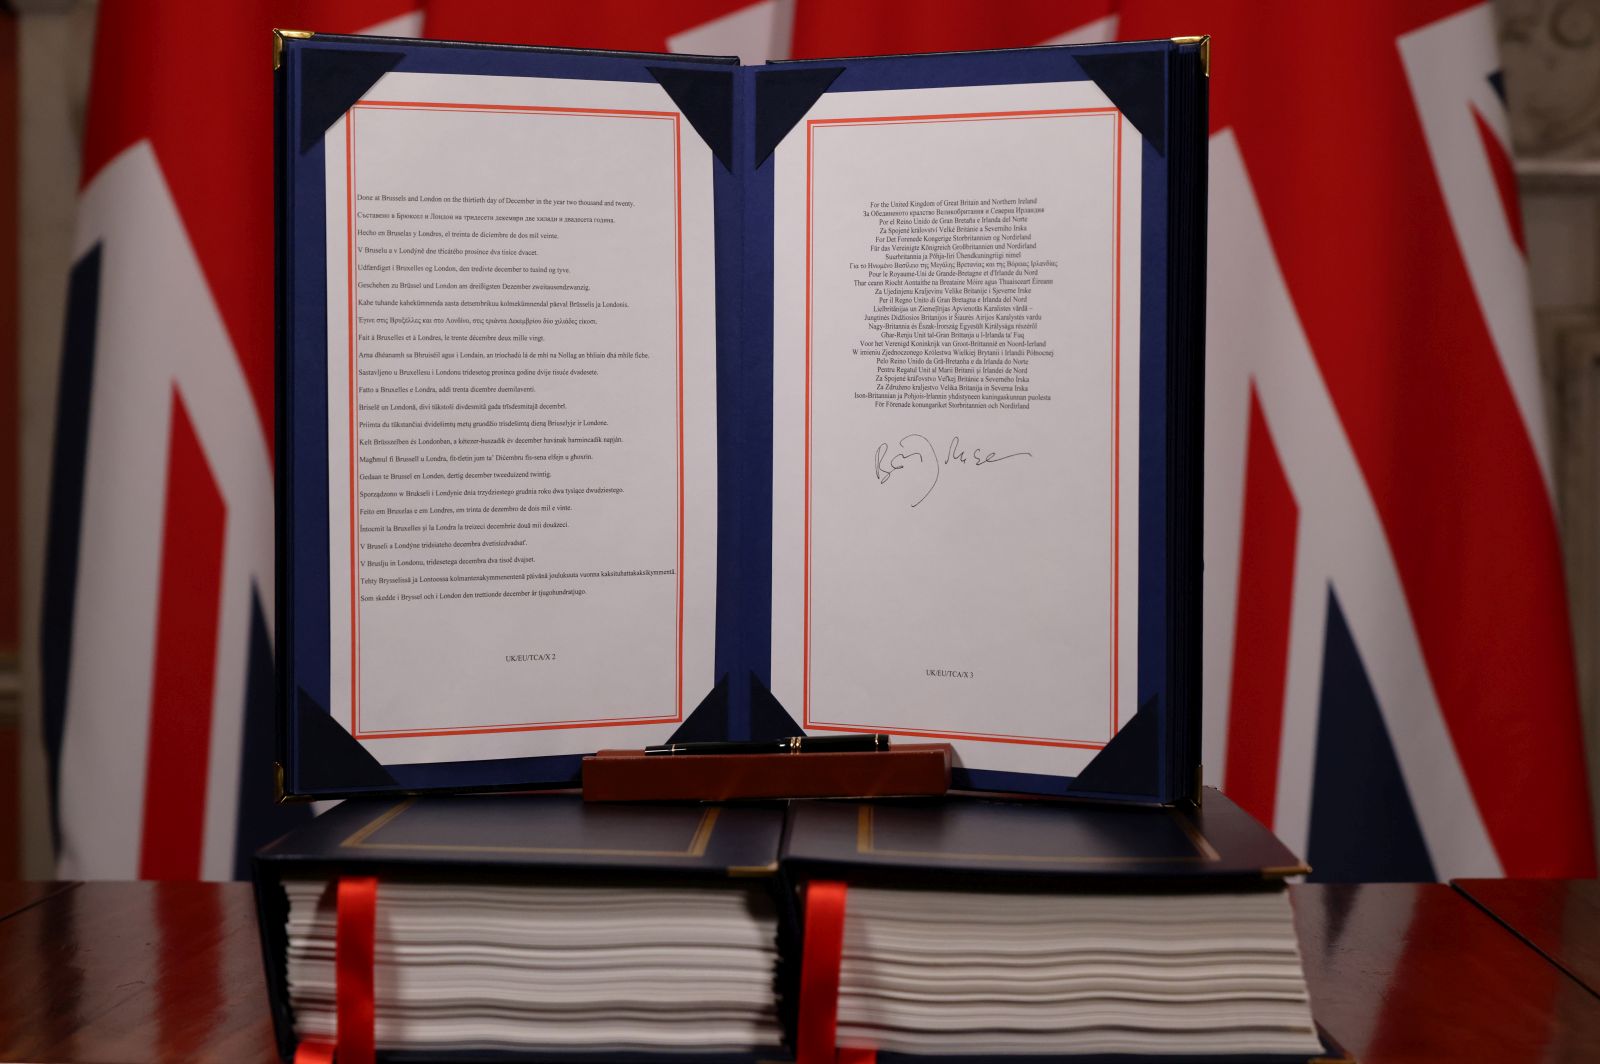 epa08912242 A handout photo made available by n10 Downing Street shows the Trade and Cooperation Agreement between the UK and the EU, the Brexit trade deal, signed by Britain's Prime Minister Boris Johnson, at 10 Downing Street London, Britain, 30 December 2020 (issued 31 December 2020).  EPA/ANDREW PARSONS/DOWNING STREET HANDOUT -- The Image can not be altered in any form. -- HANDOUT EDITORIAL USE ONLY/NO SALES